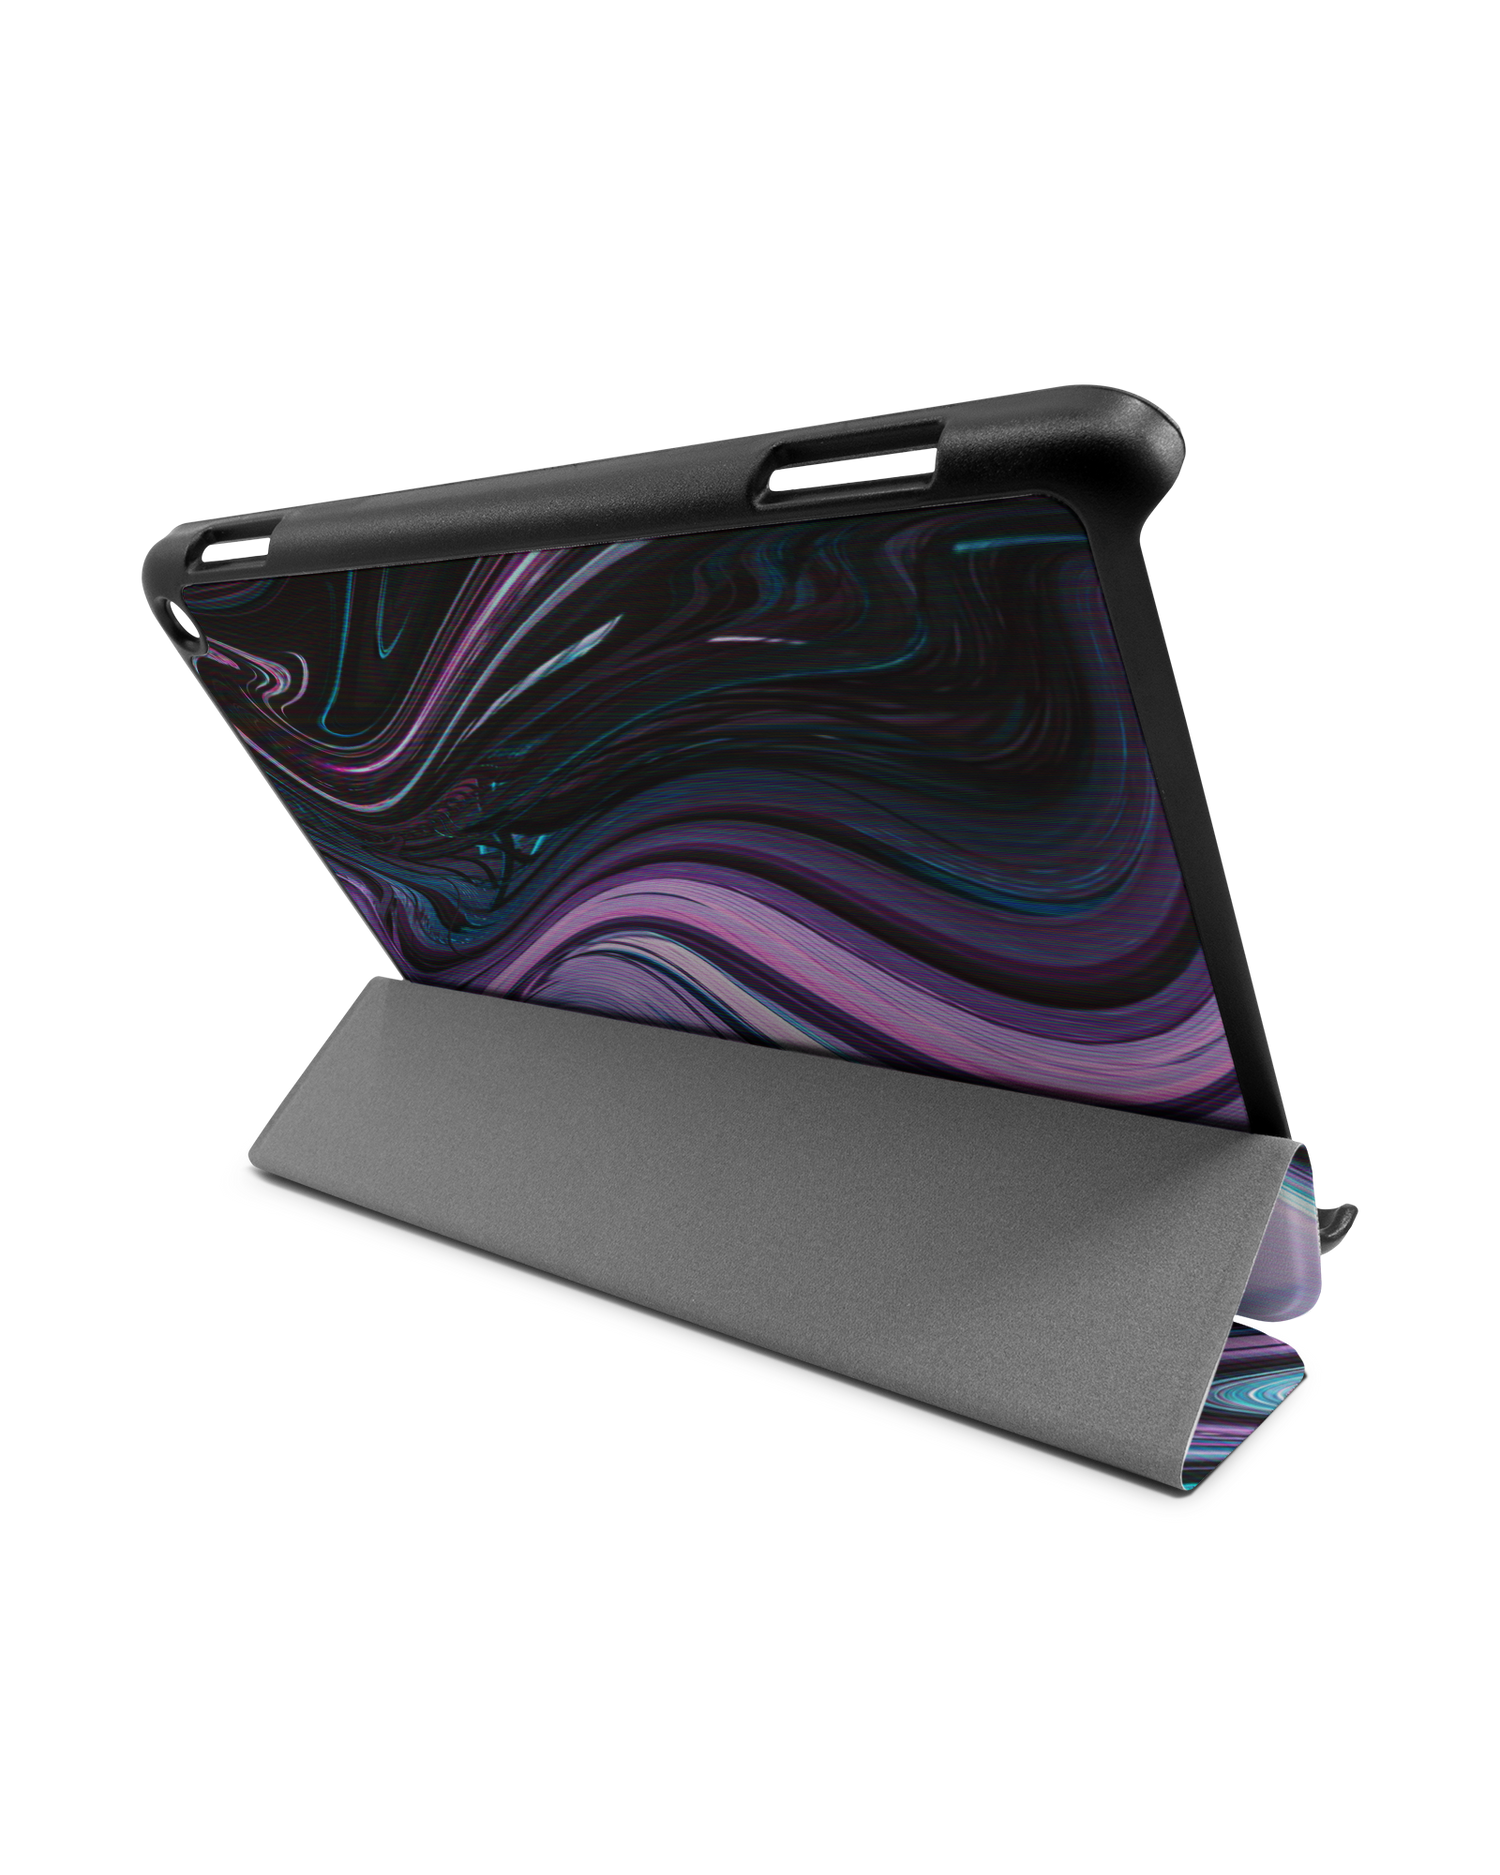 Digital Swirl Tablet Smart Case for Amazon Fire HD 8 (2022), Amazon Fire HD 8 Plus (2022), Amazon Fire HD 8 (2020), Amazon Fire HD 8 Plus (2020): Used as Stand